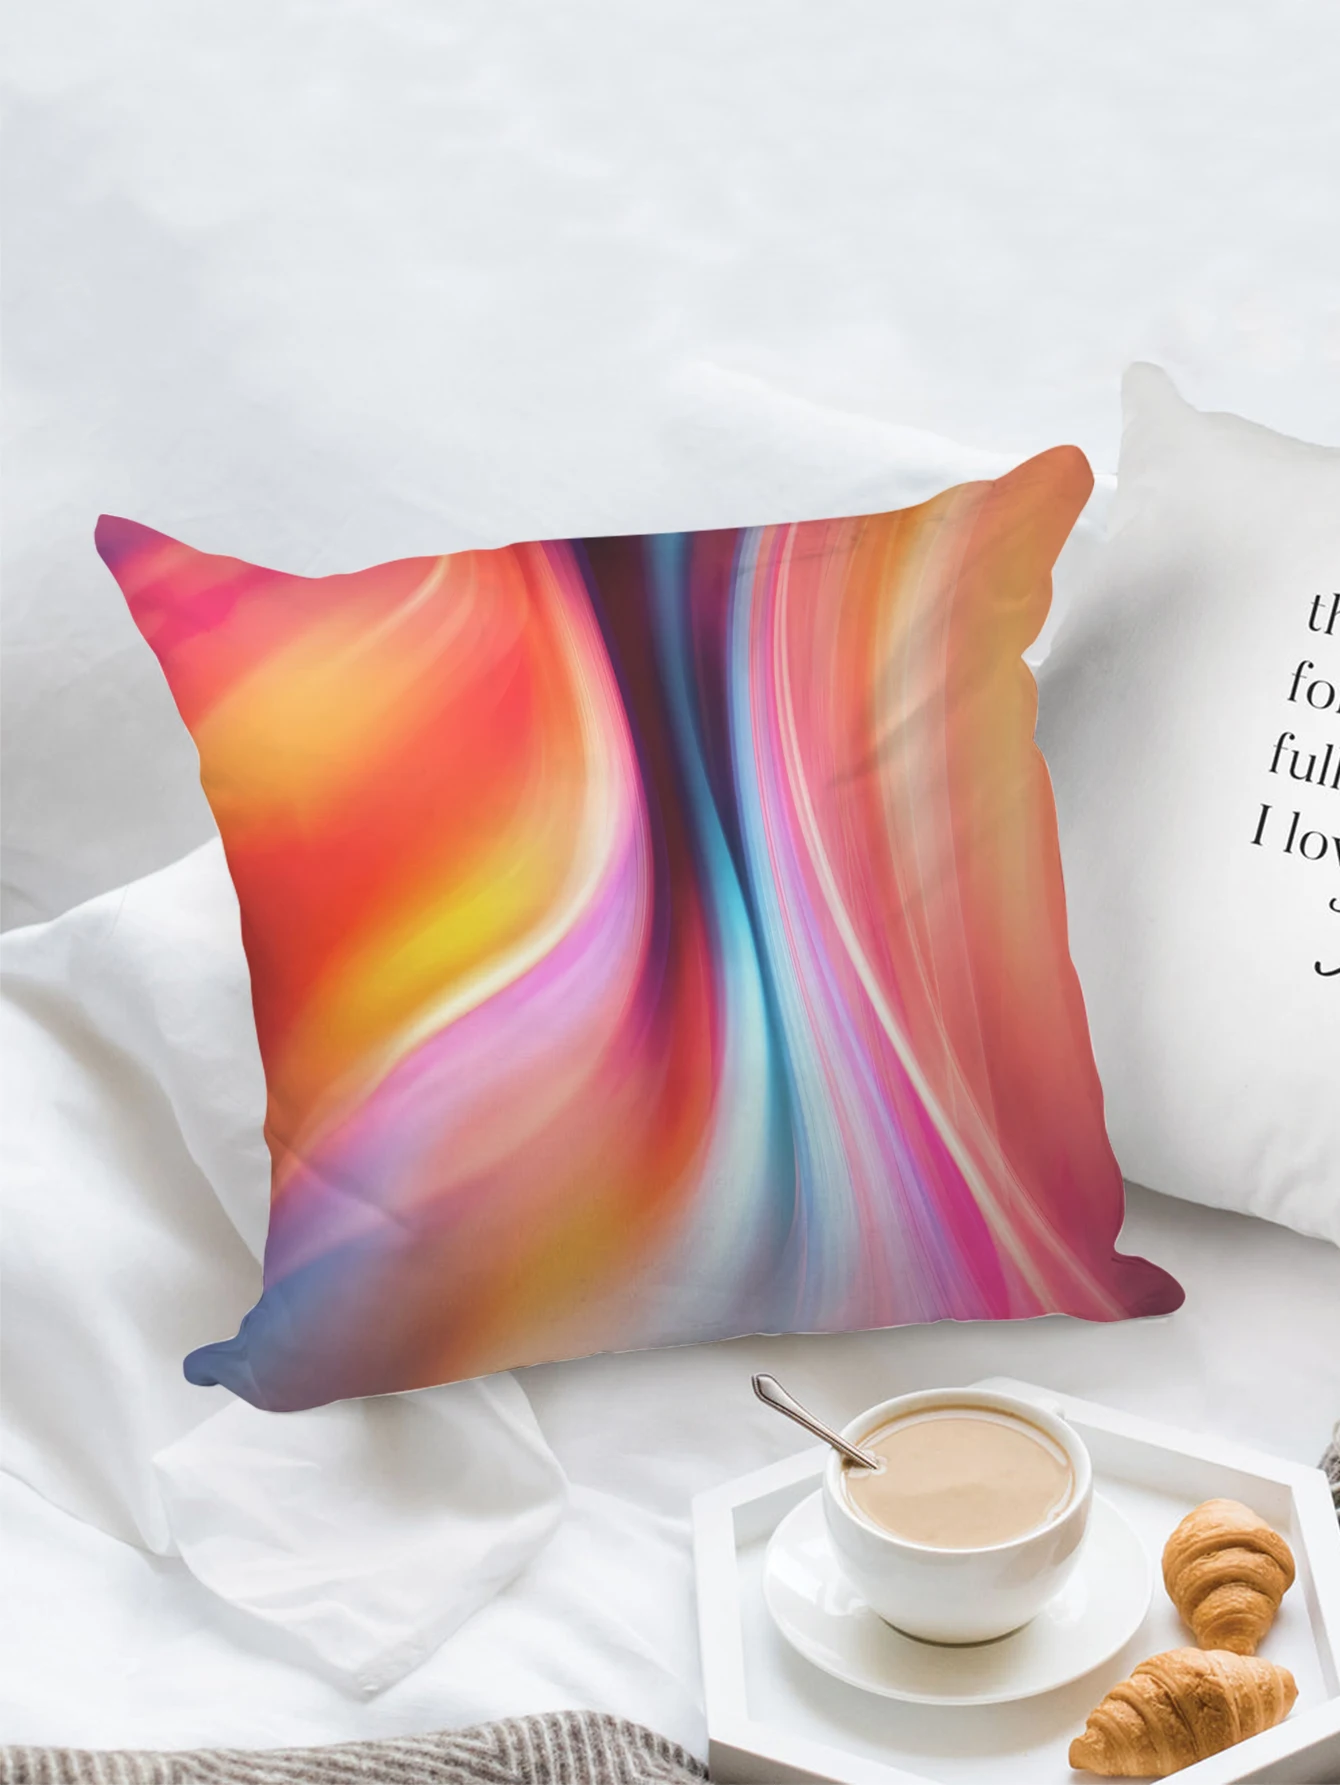 Decorative Color Pillowcase Polyester Square Cushion Cover Throw Pillows Bed Couch Home Decor Dakimakura 45x45cm